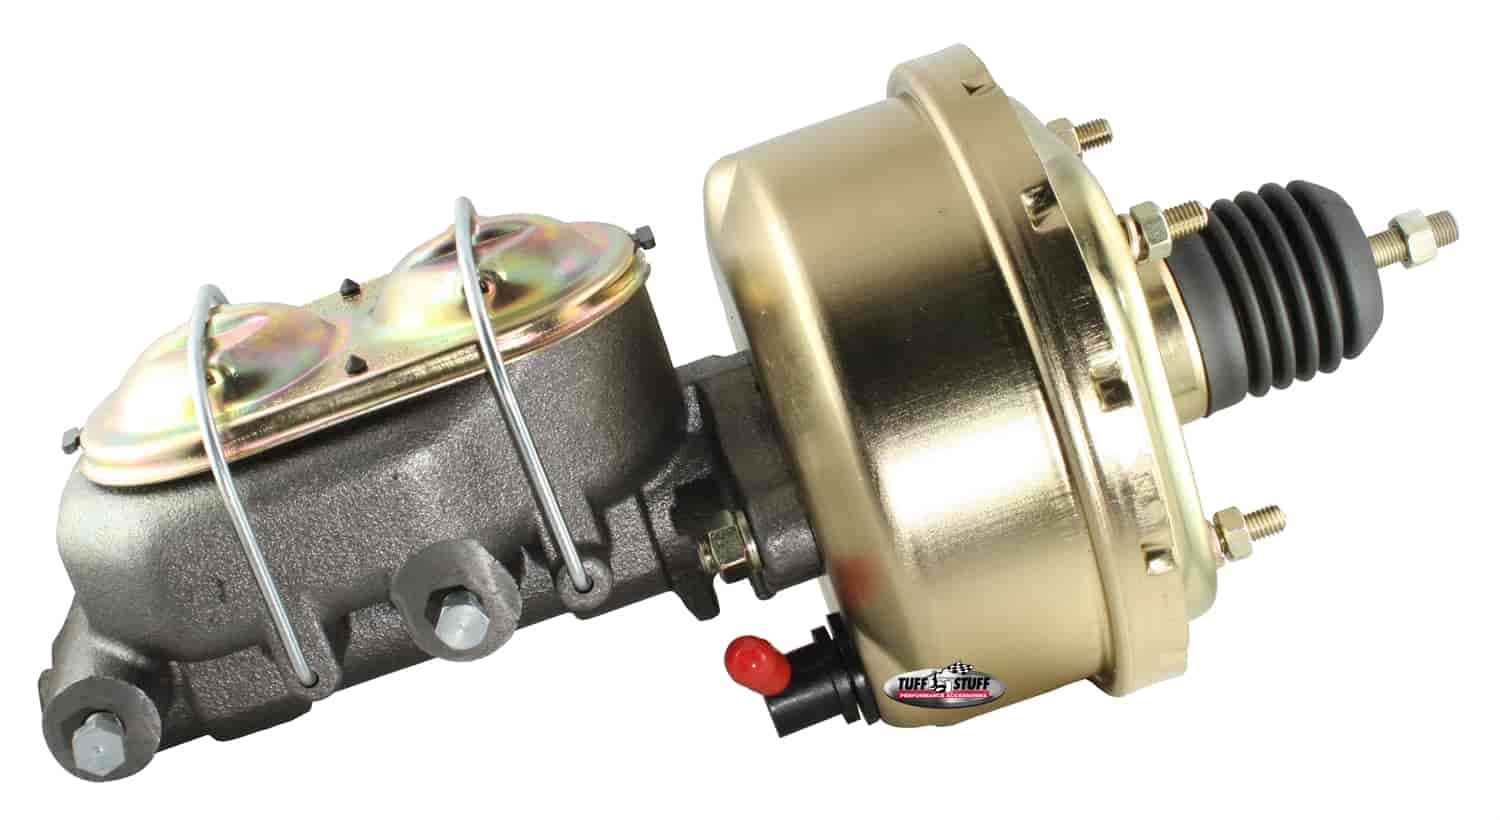 7" Booster Combo 2018 Master Cylinder